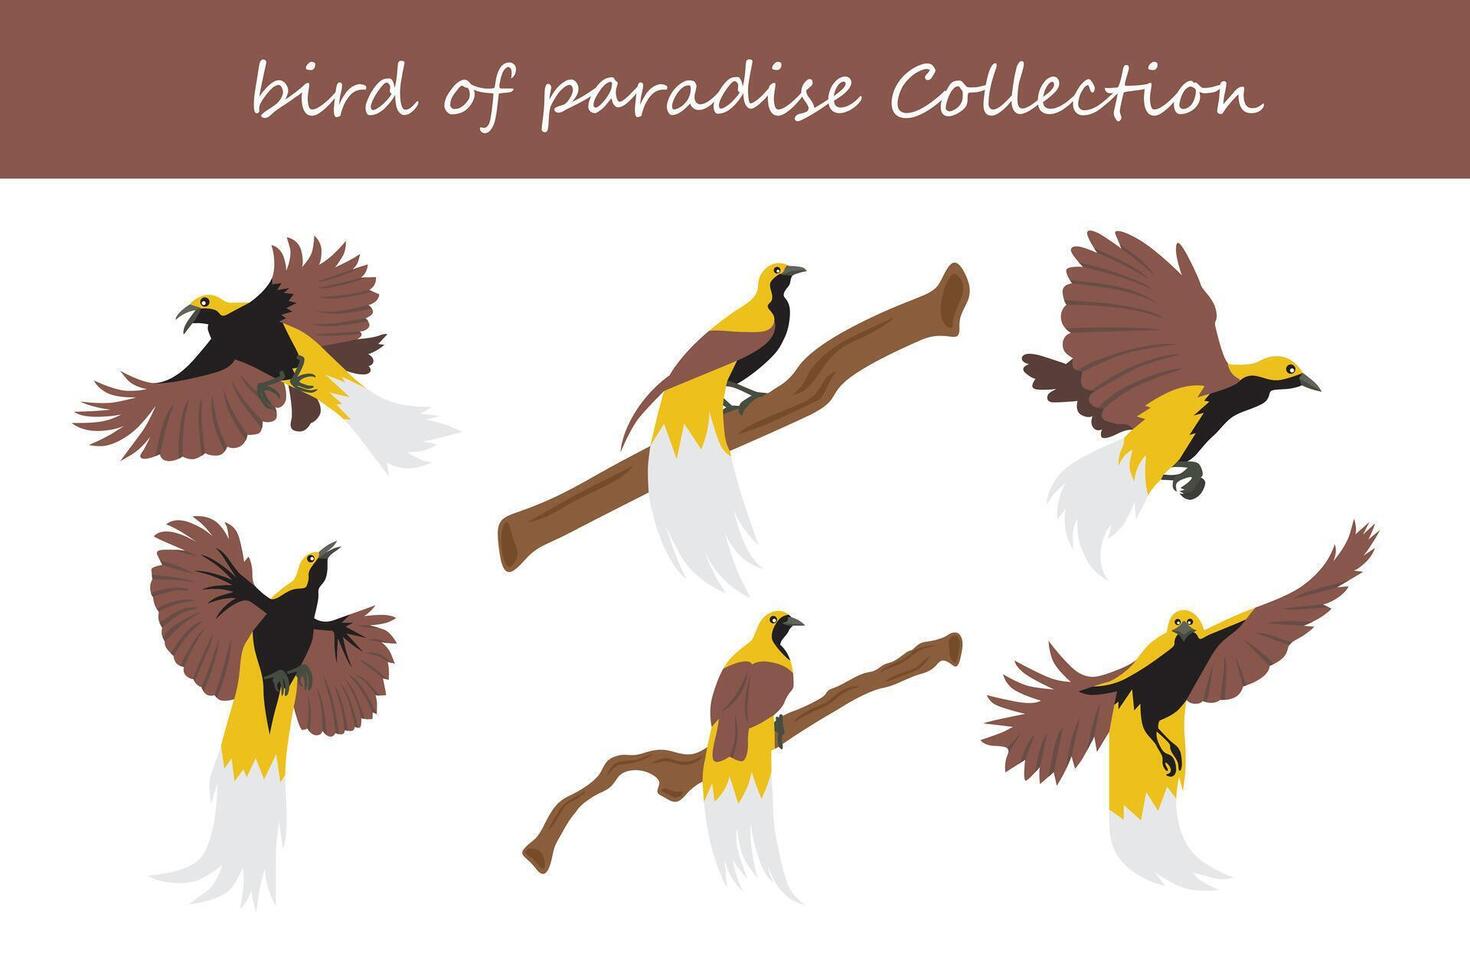 bird of paradise collection. bird of paradise in different poses. vector